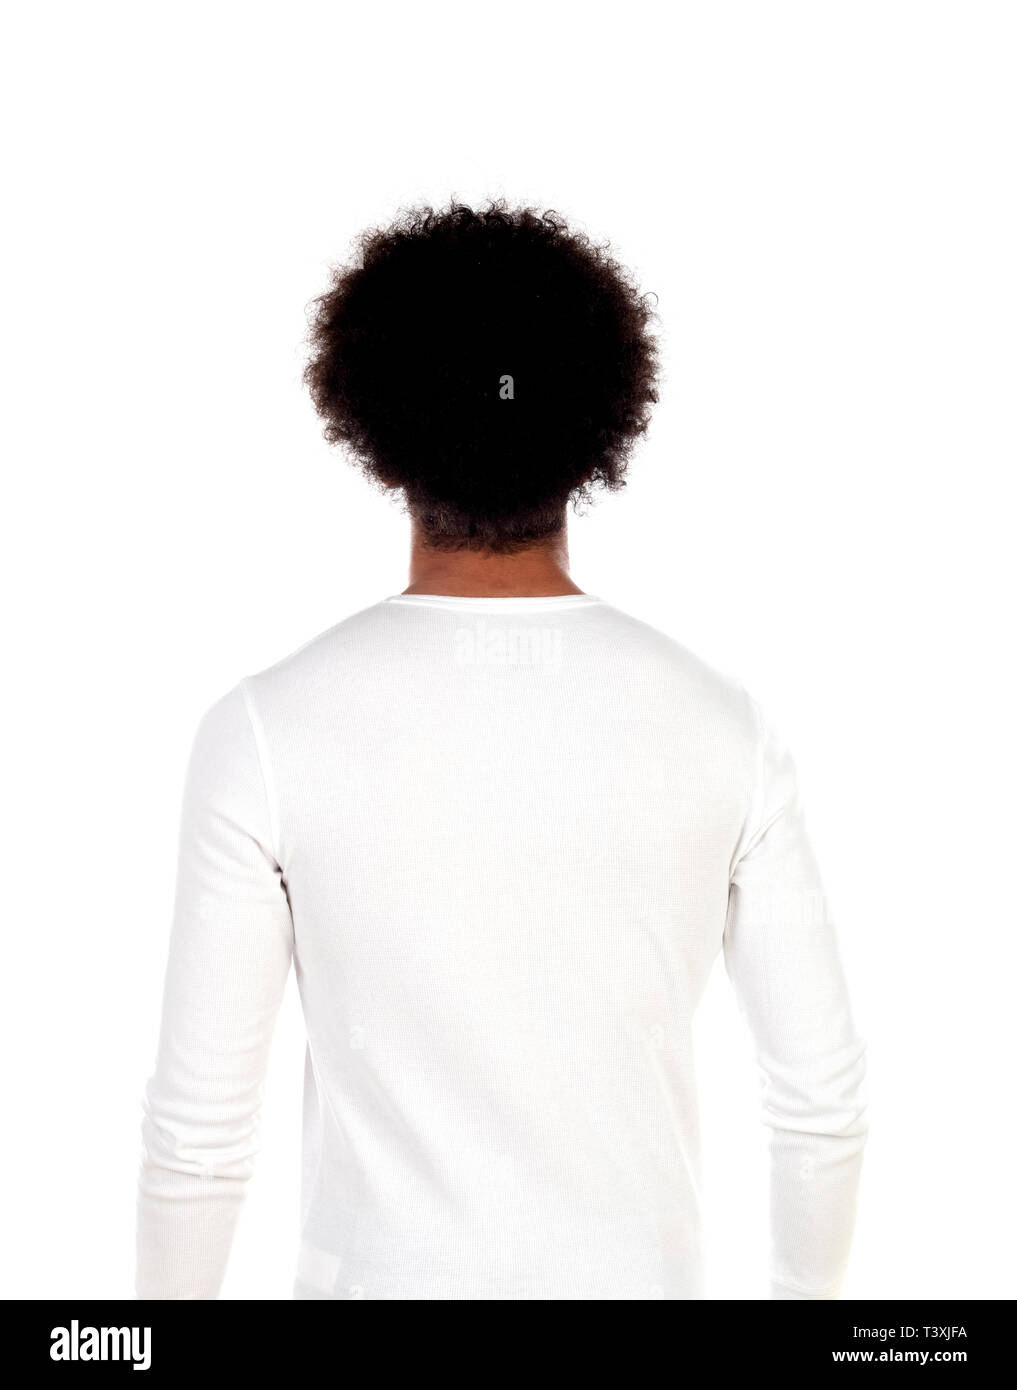 Portrait young man with afro hairstyle posing back on a white background Stock Photo